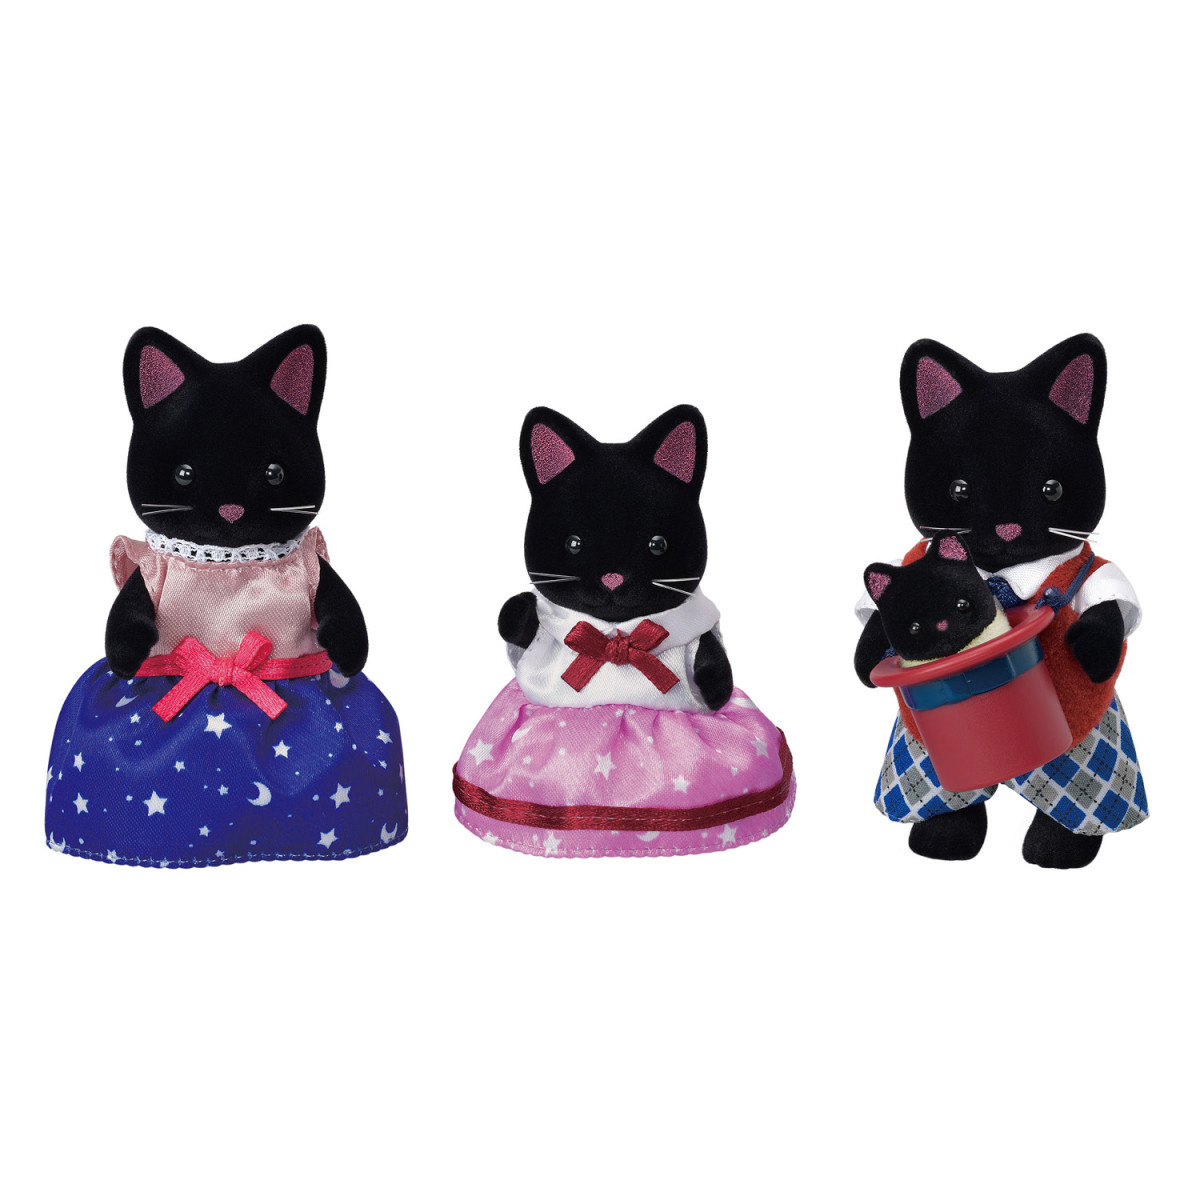 Midnight Cat Family, , large image 0